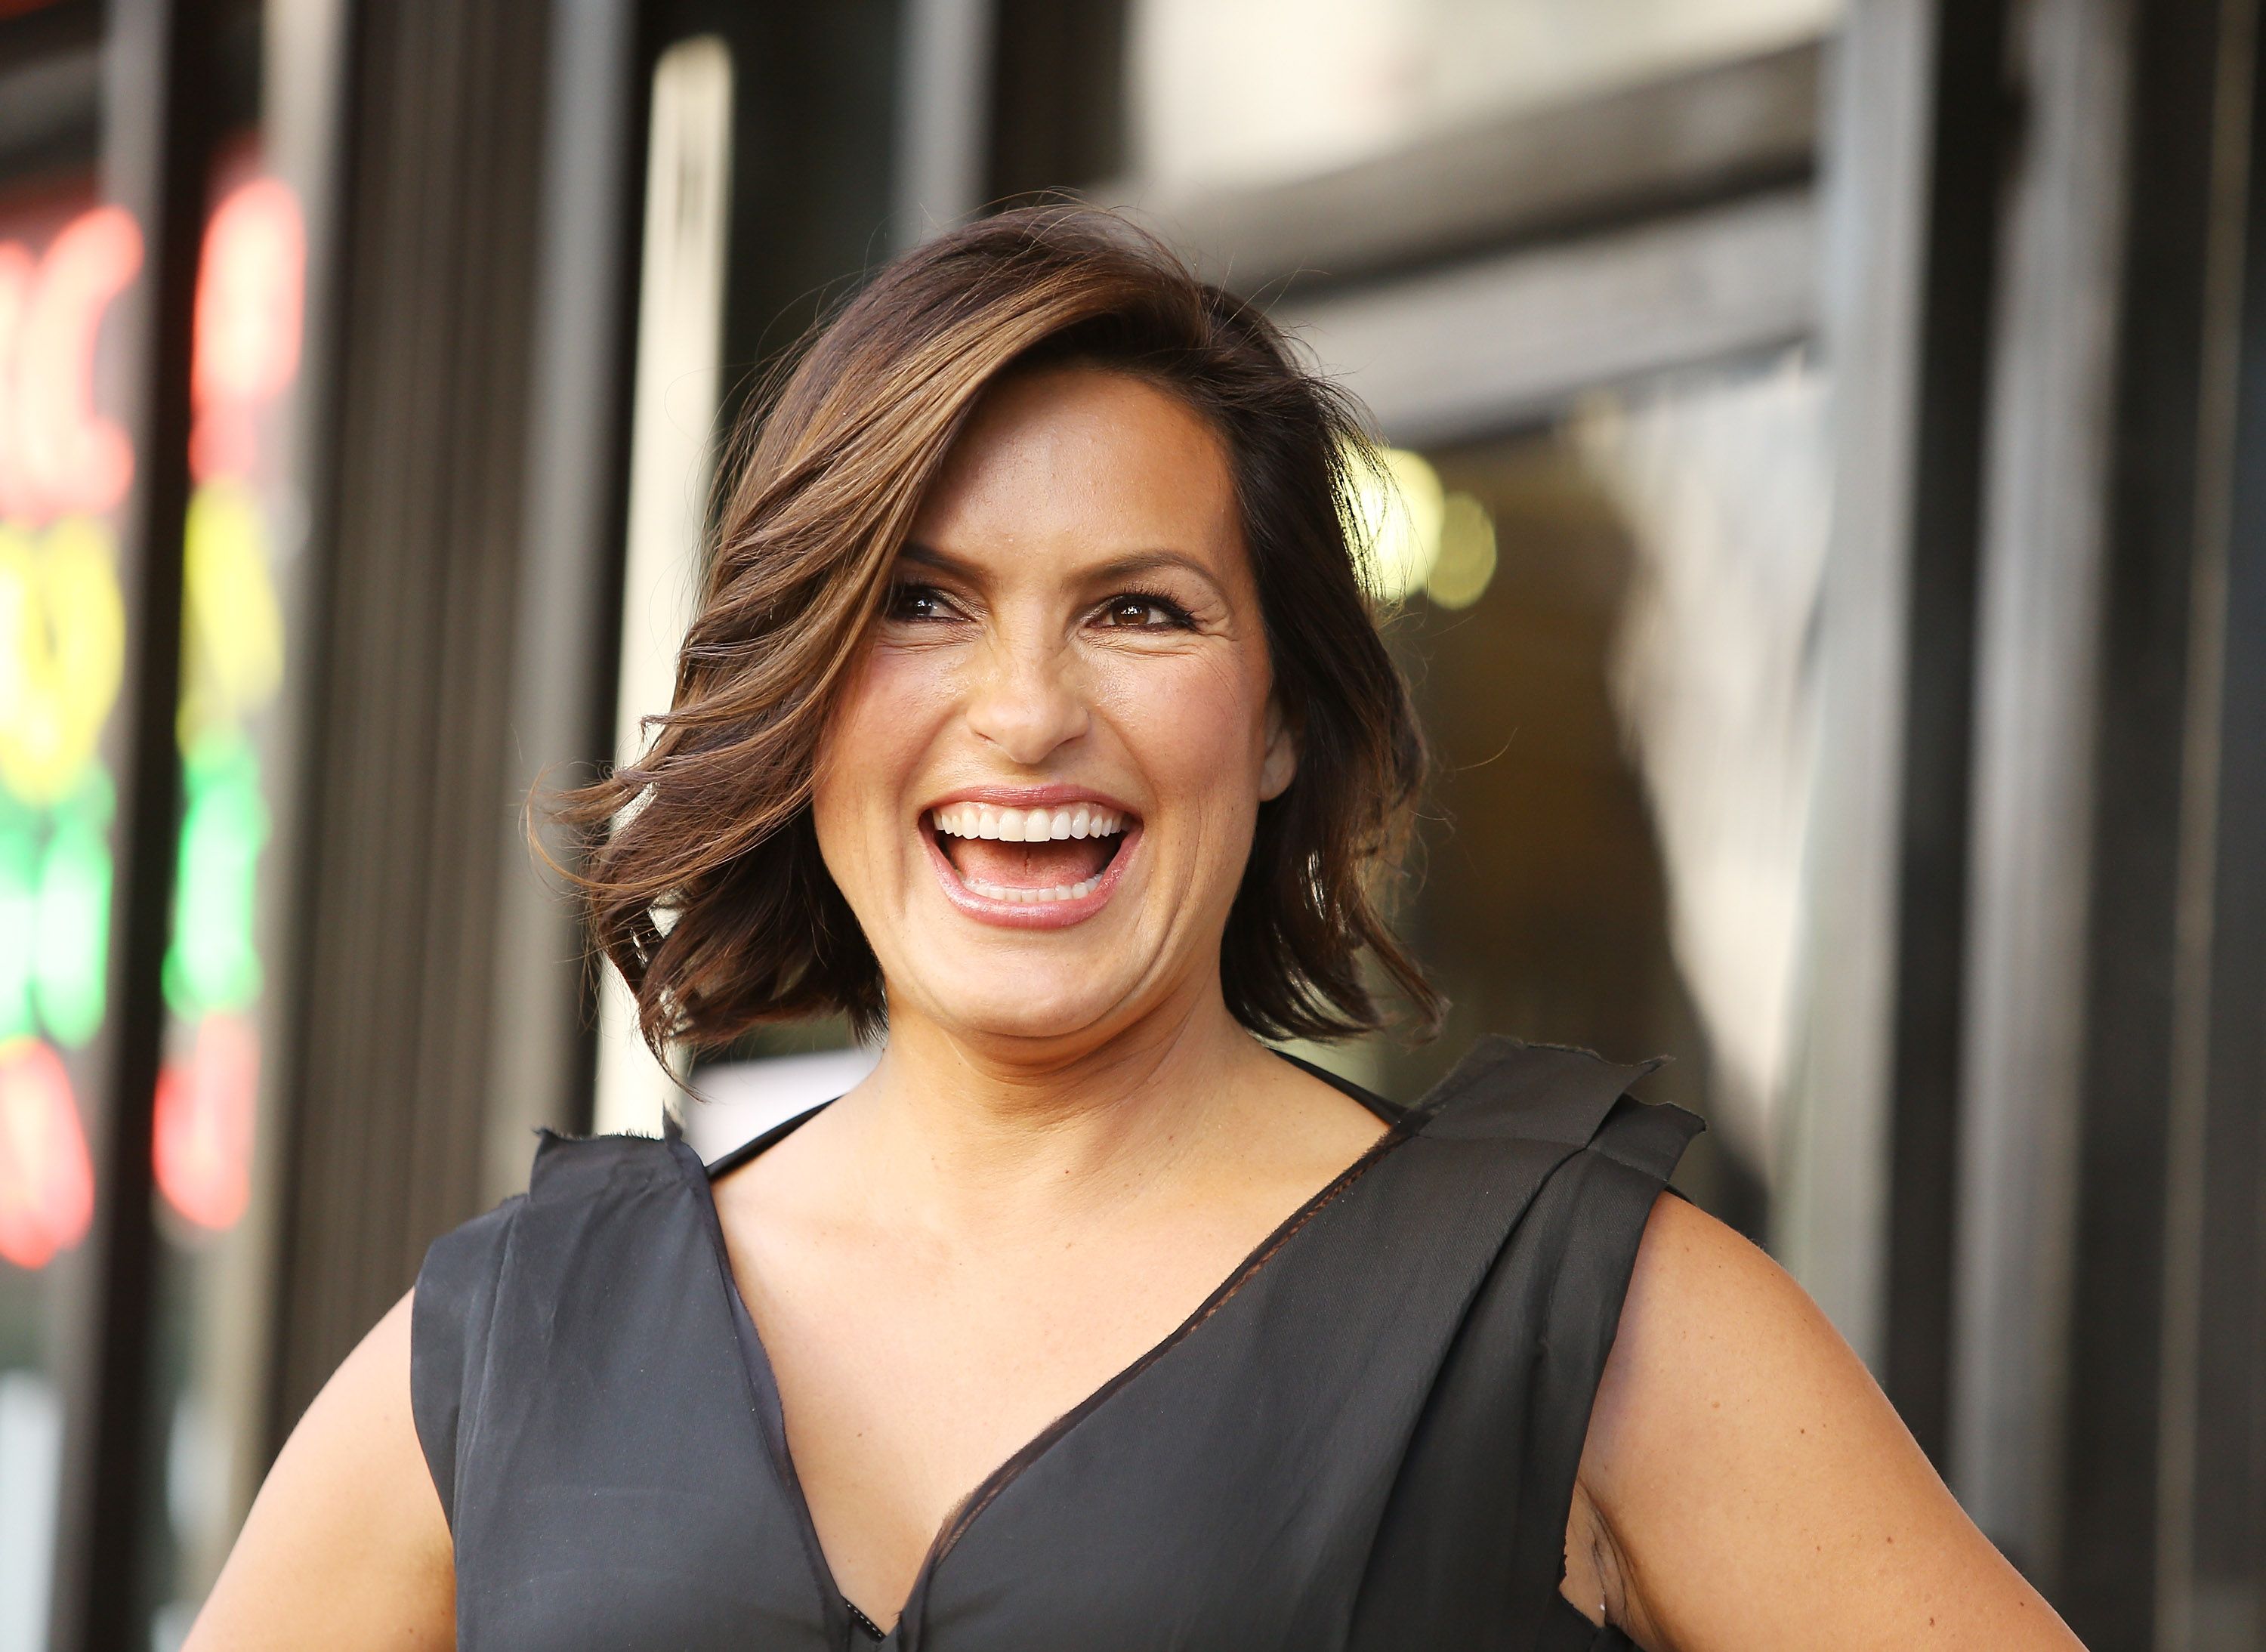 Mariska Hargitay at the ceremony honoring her with a Star on The Hollywood Walk of Fame on November 8, 2013 in Hollywood, California | Photo: Getty Images